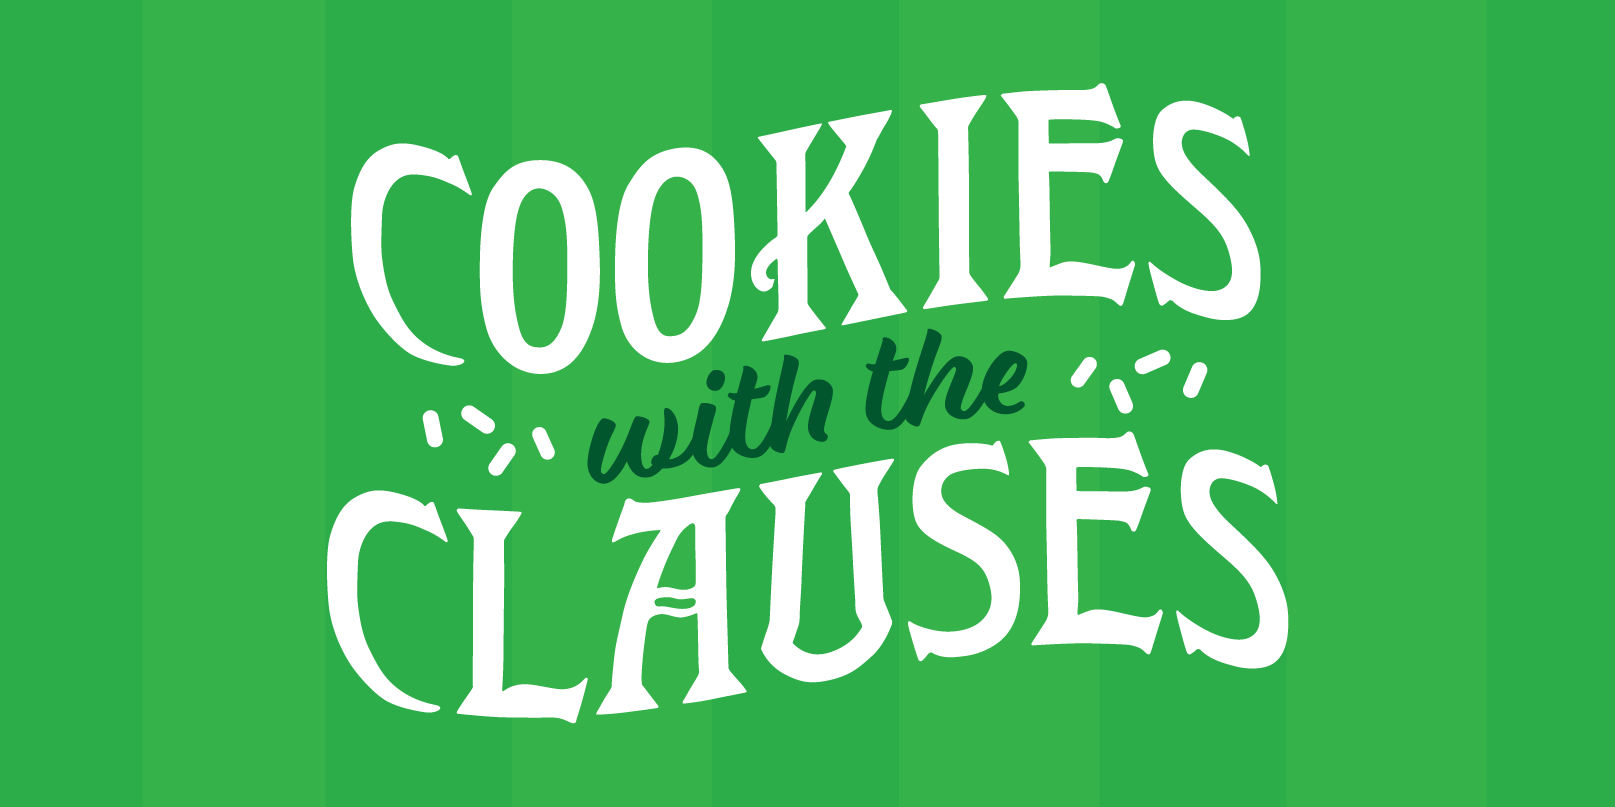 Cookies with the Clauses promotional image